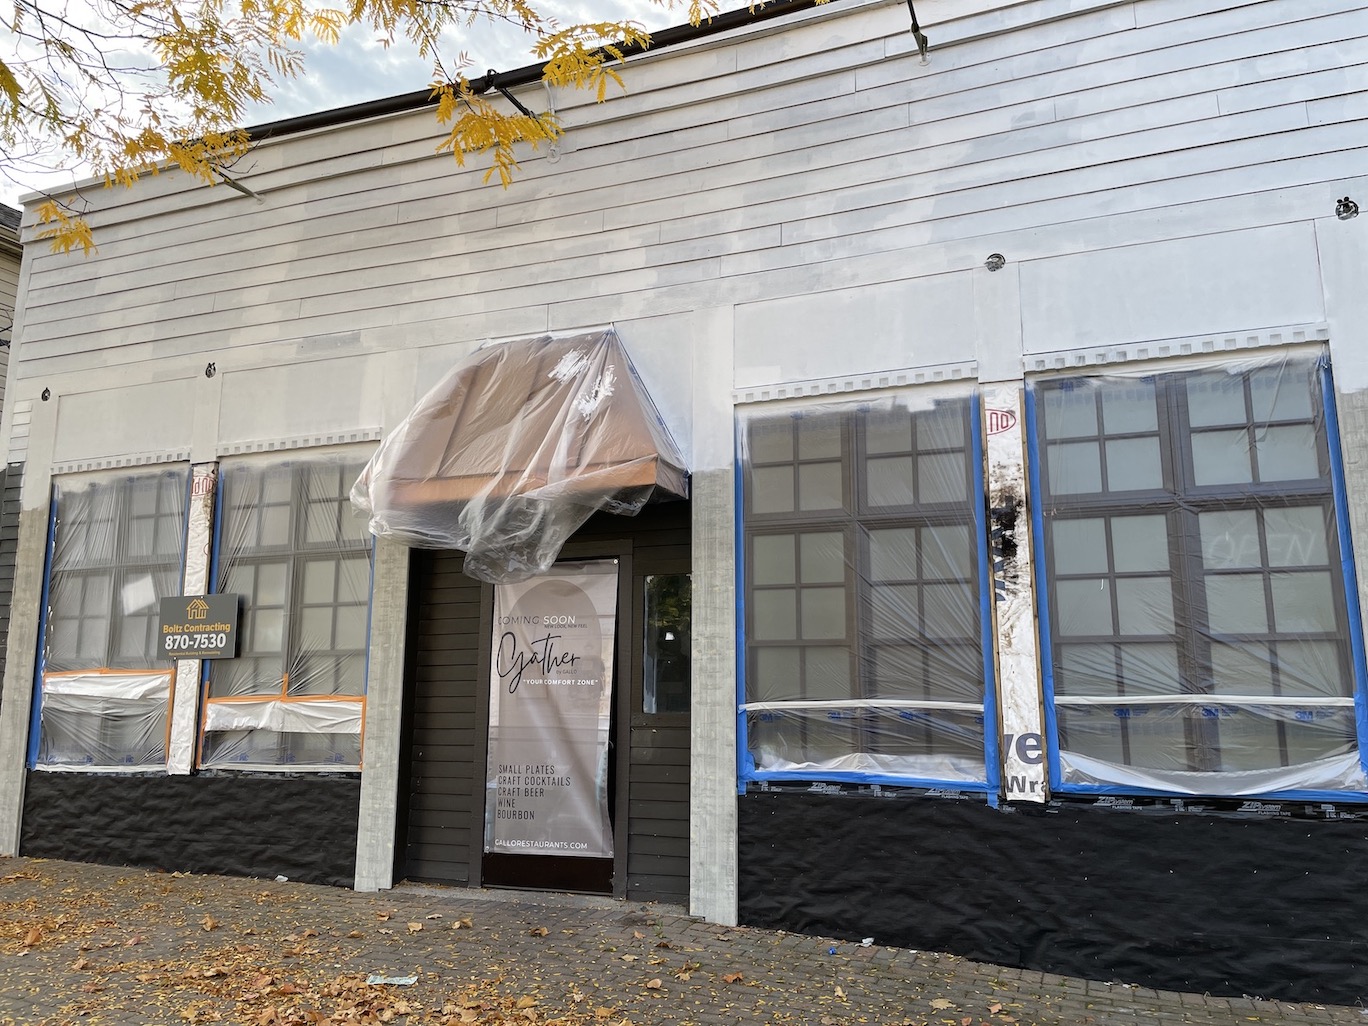 Renovations are underway at Gather American Eatery on Center Street.